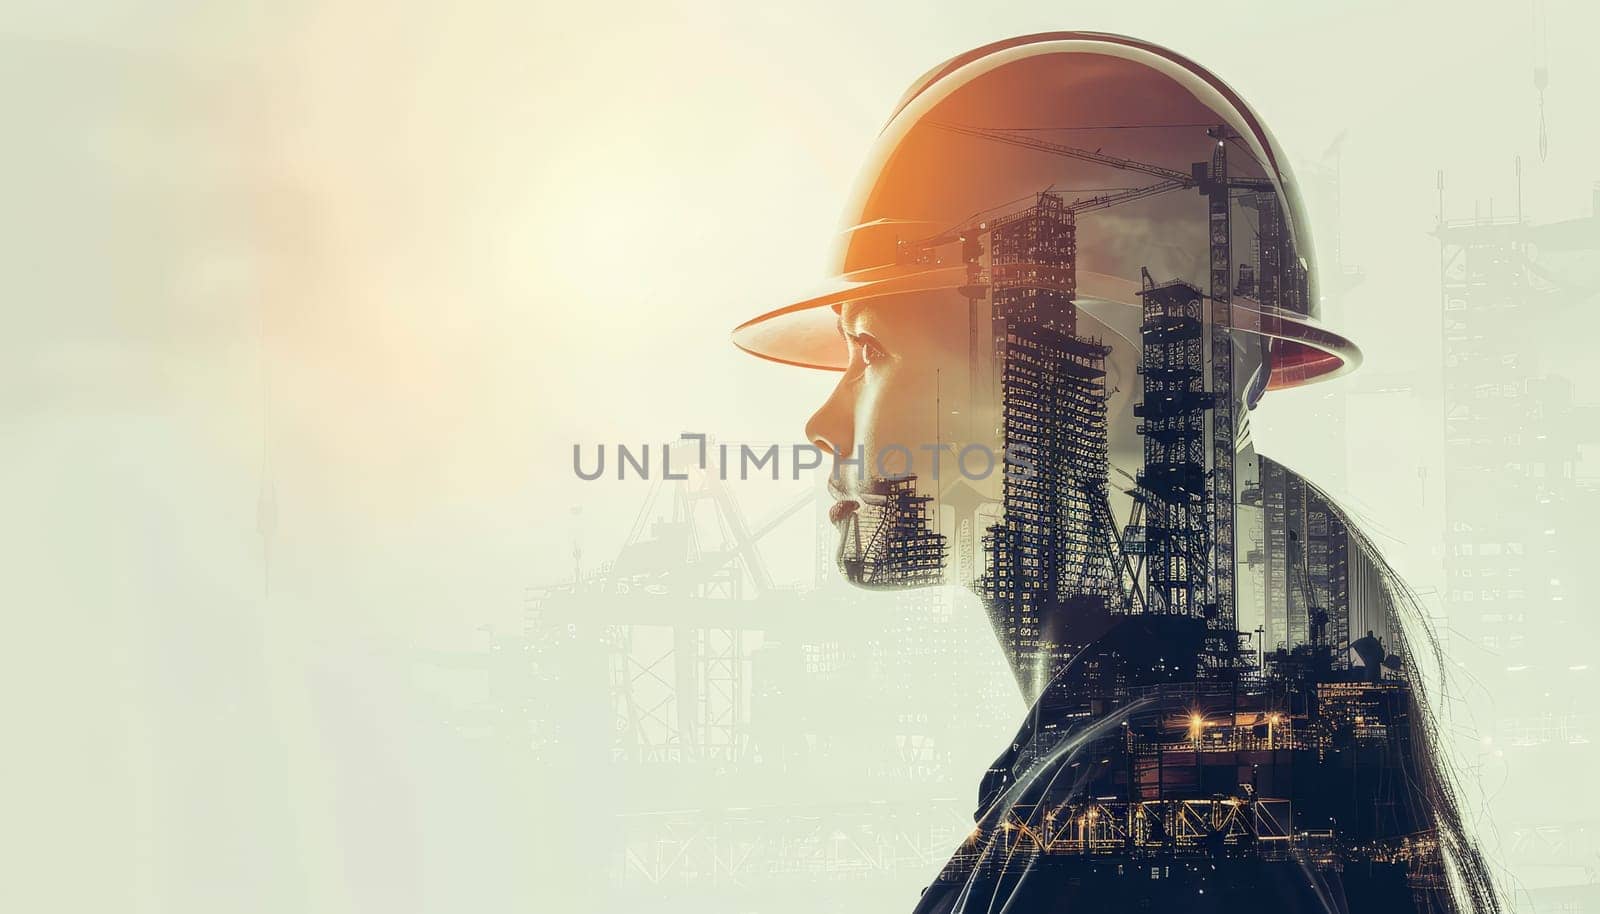 A woman wearing a hard hat is looking out over a city by AI generated image.